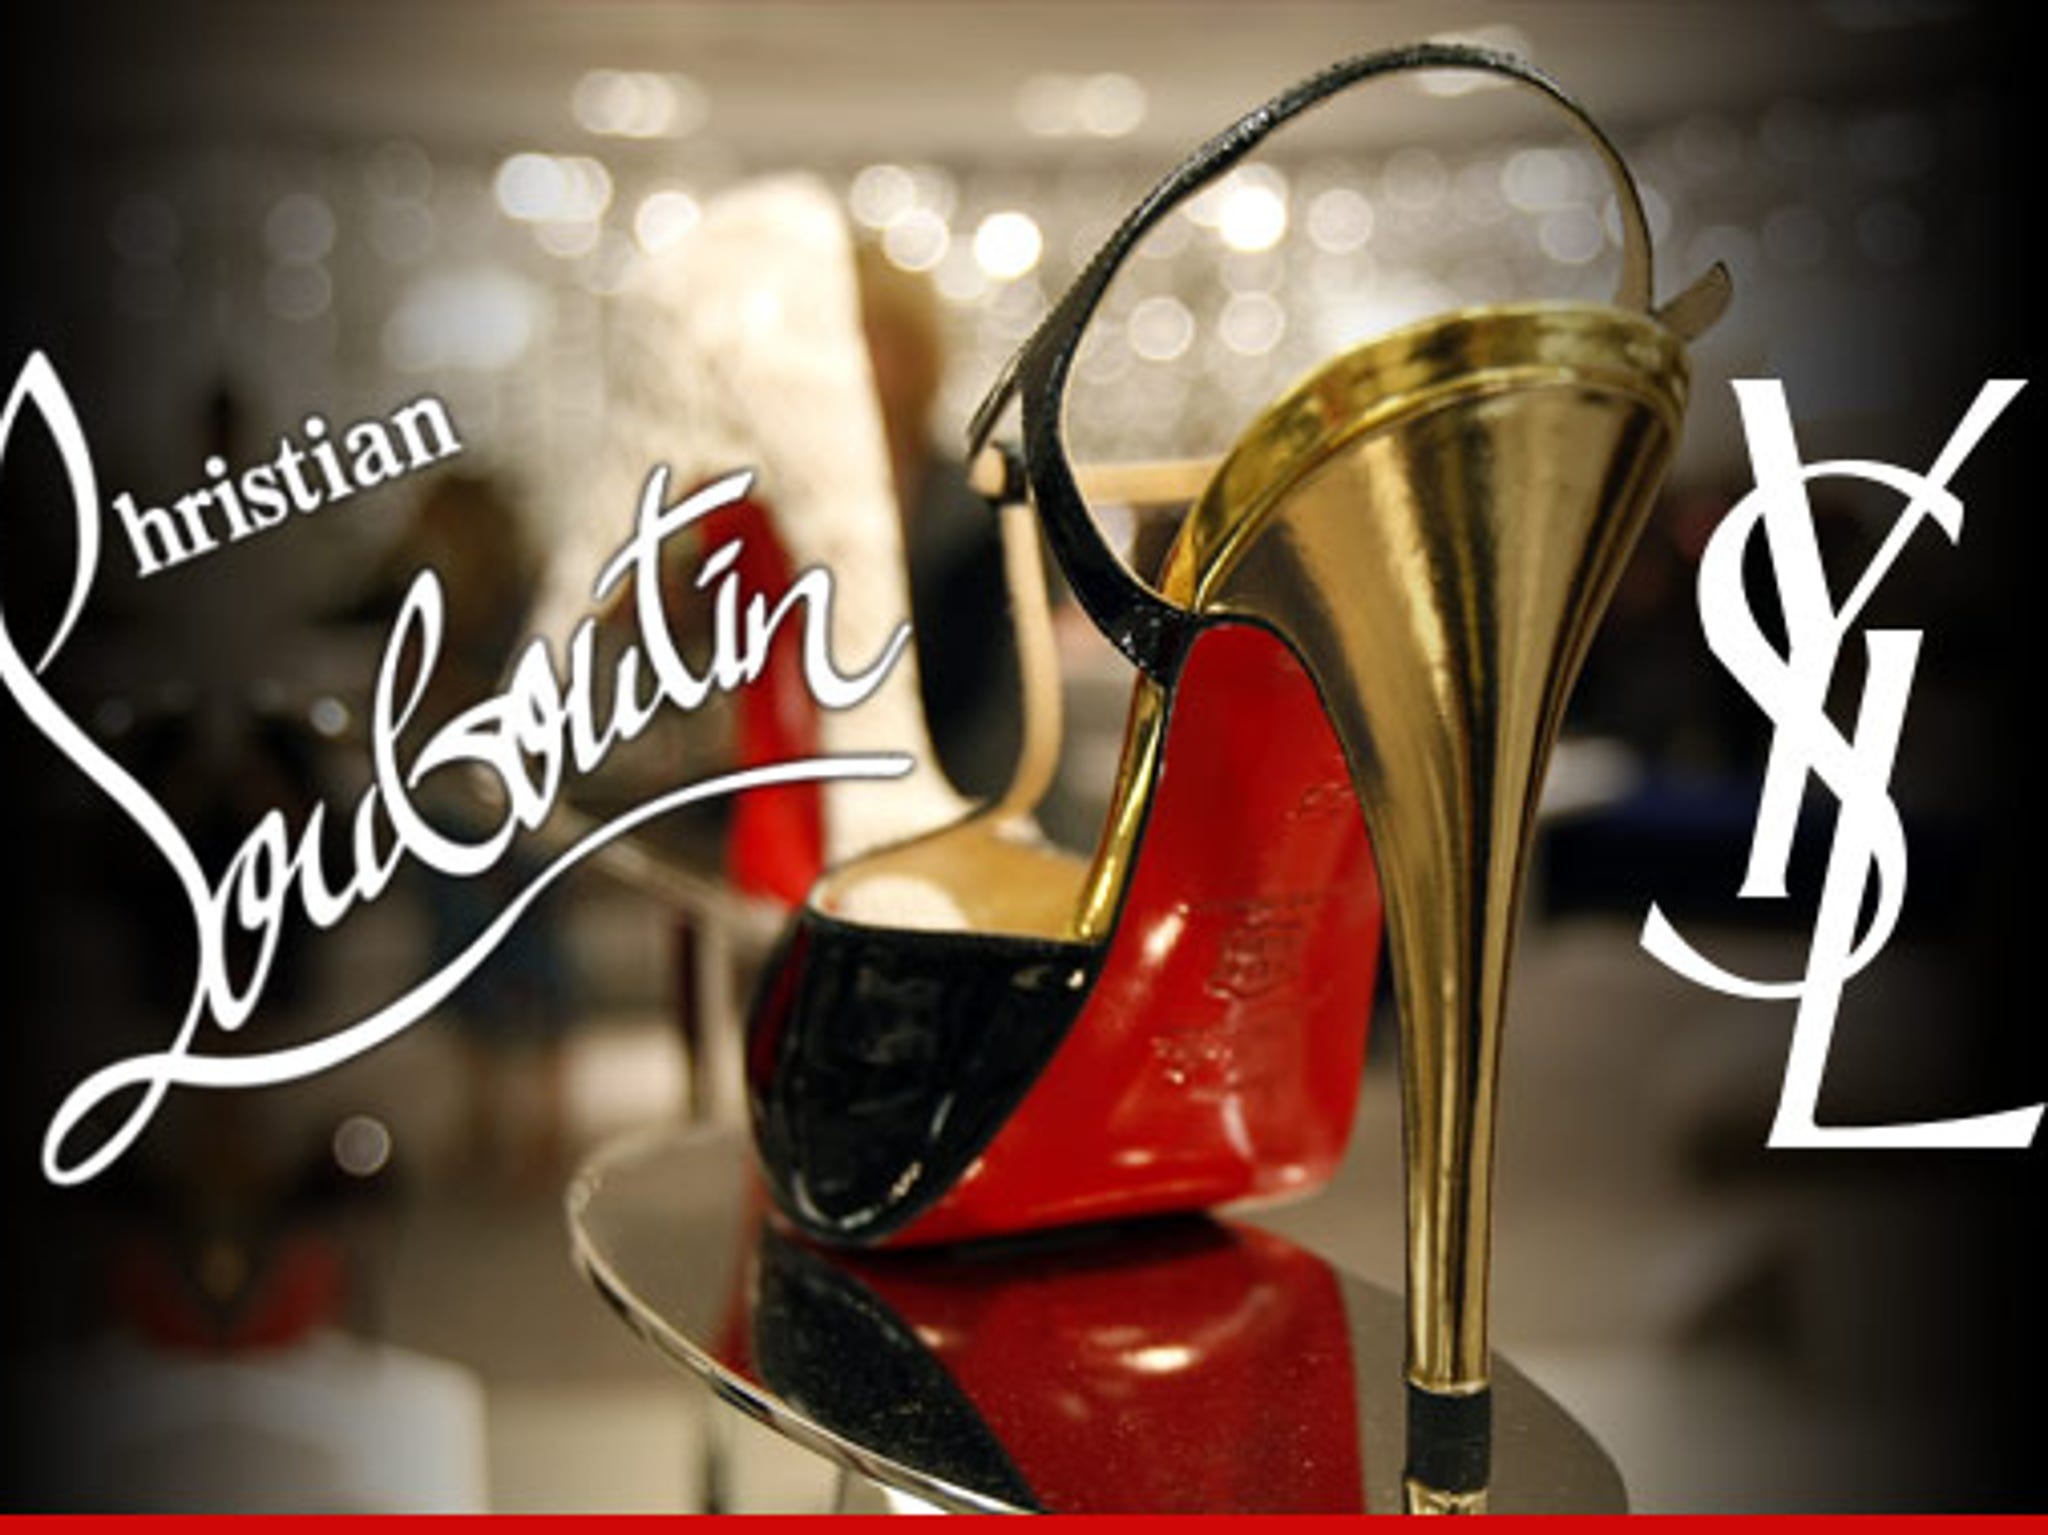 Christian Louboutin Claims Victory in Lawsuit Over Signature Red